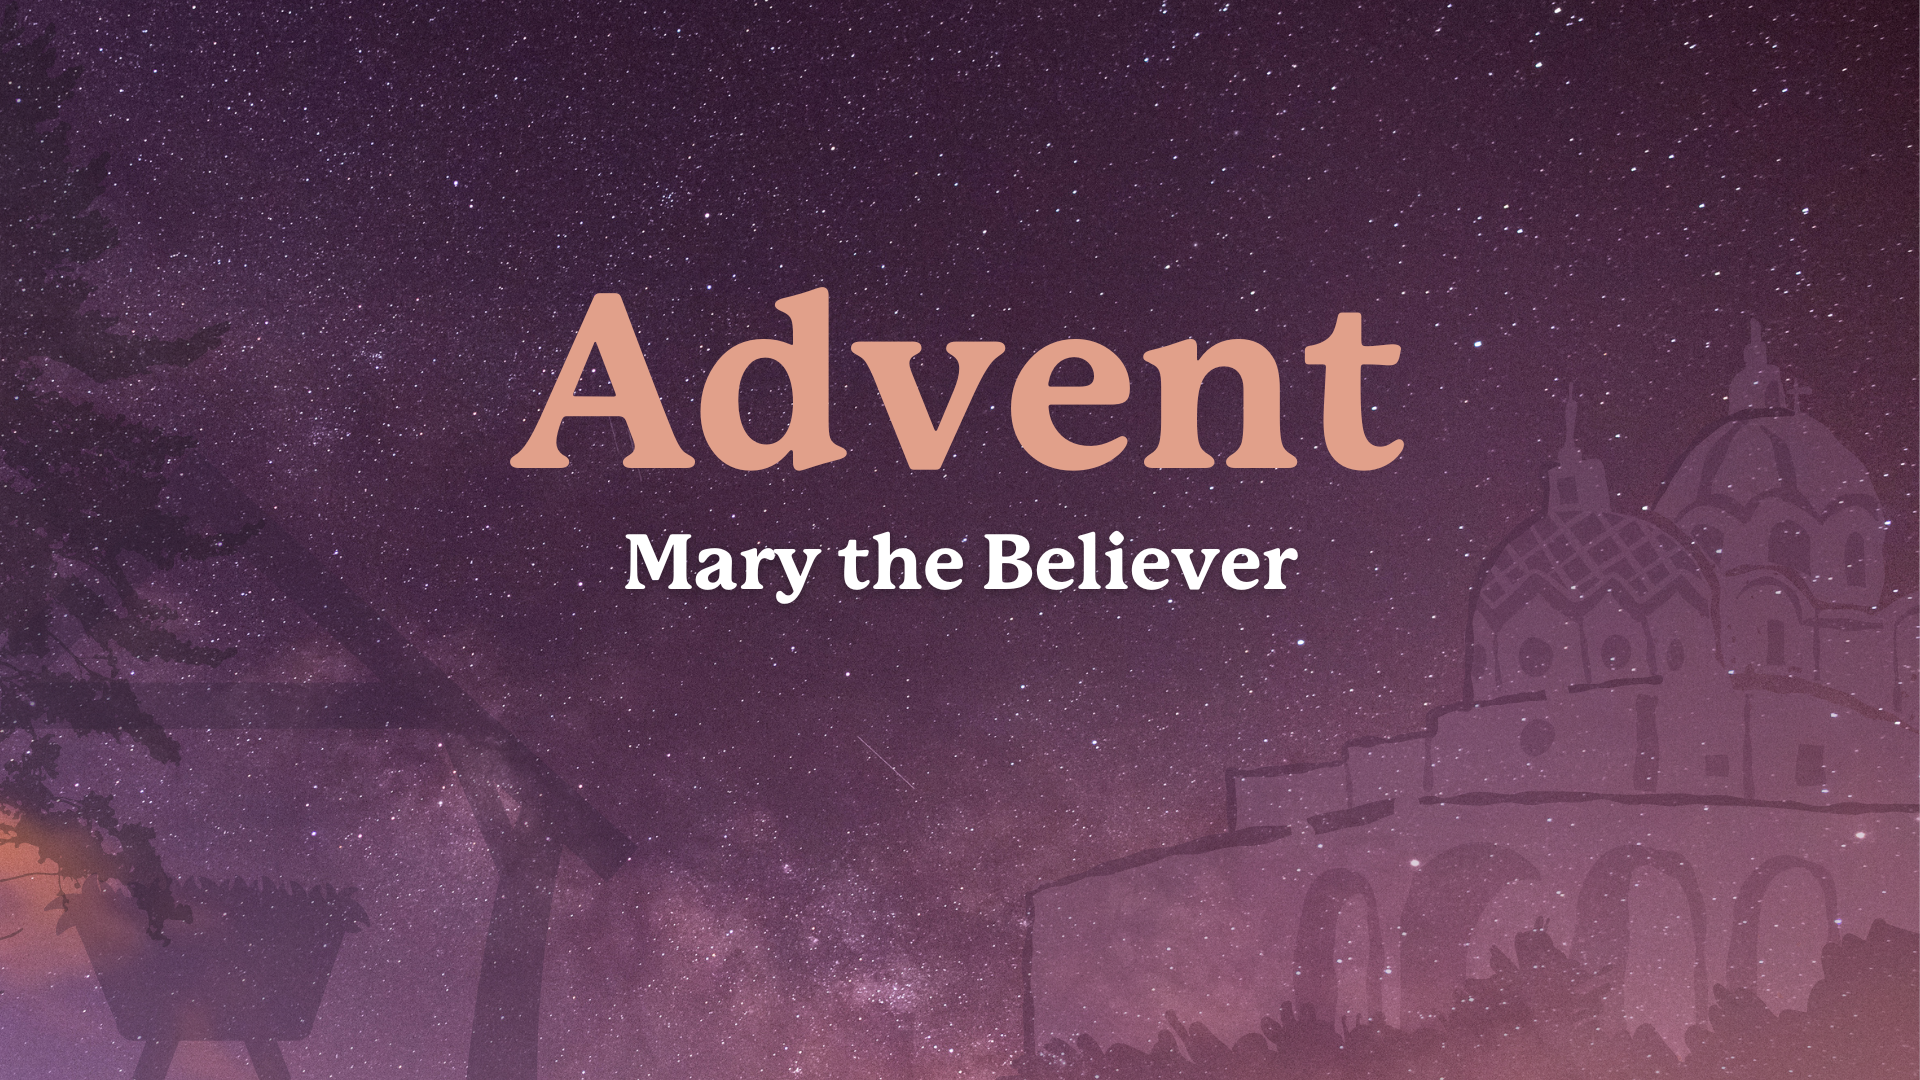 Sunday Service - Mary the Believer